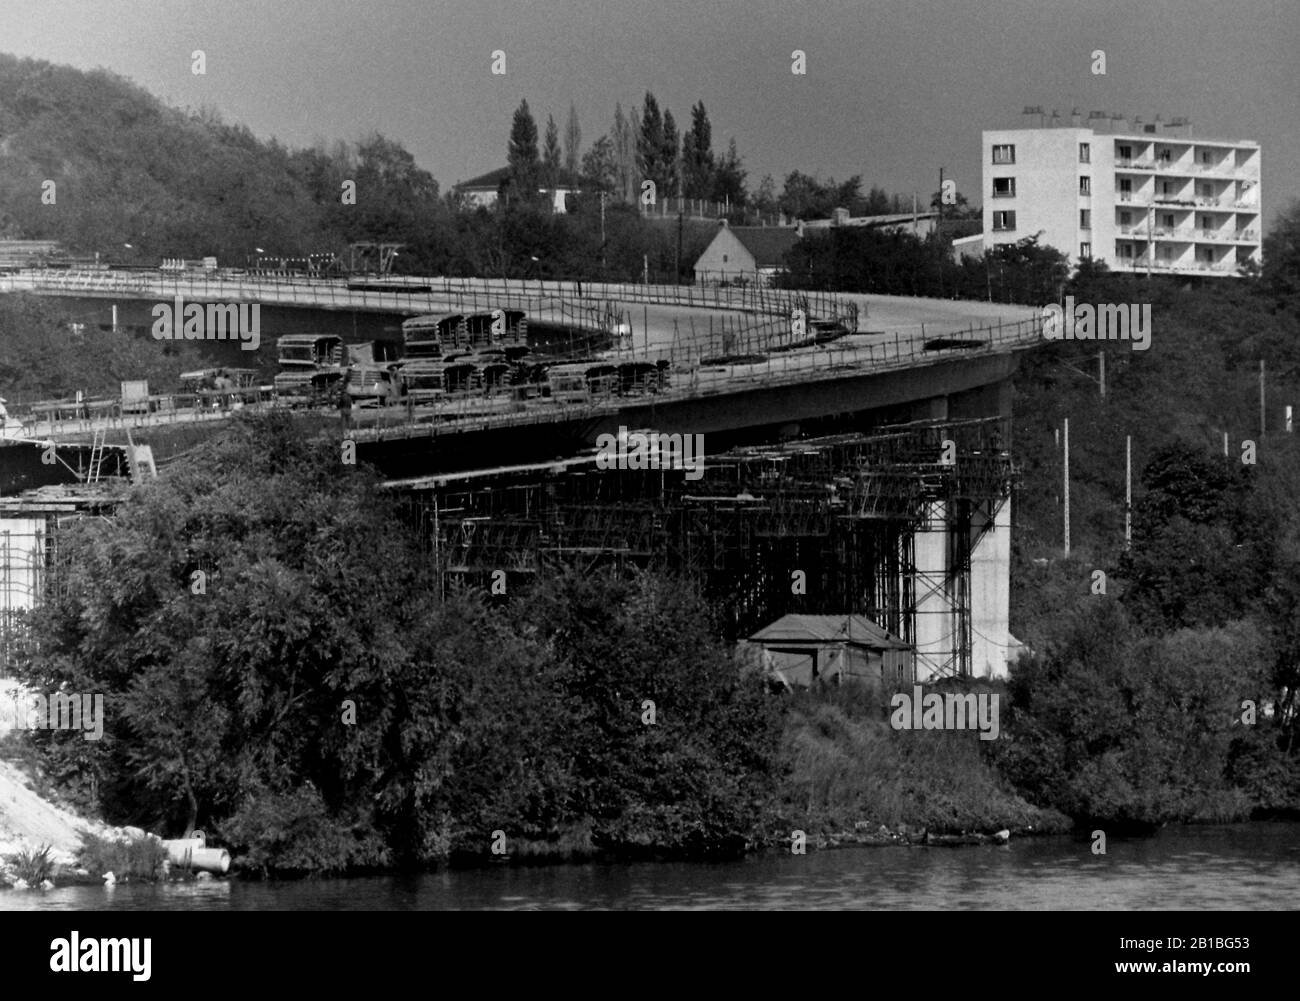 AJAXNETPHOTO. SEPTEMBER, 1971. VAL D'OISE, ARGENTEUIL, FRANCE. - NEW ROAD - BUILDING THE D311 HIGHWAY OVERLOOKING THE RIVER SEINE.PHOTO:JONATHAN EASTLAND/AJAX REF:RX7 151204 175 Stock Photo